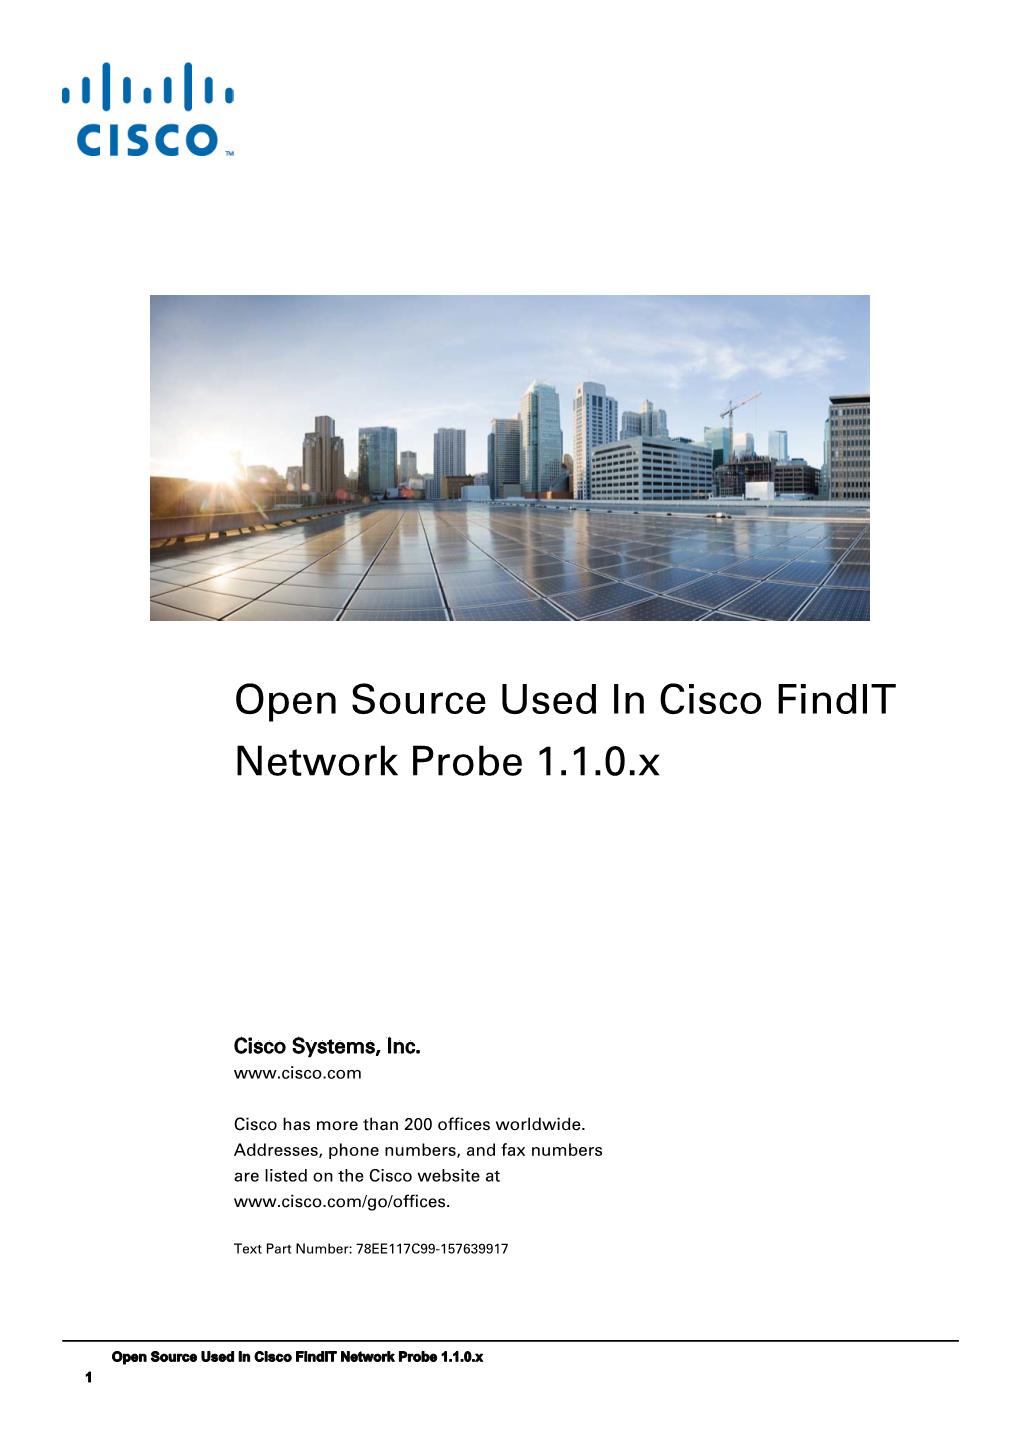 Open Source Used in Cisco Findit Network Probe, Version 1.1.0